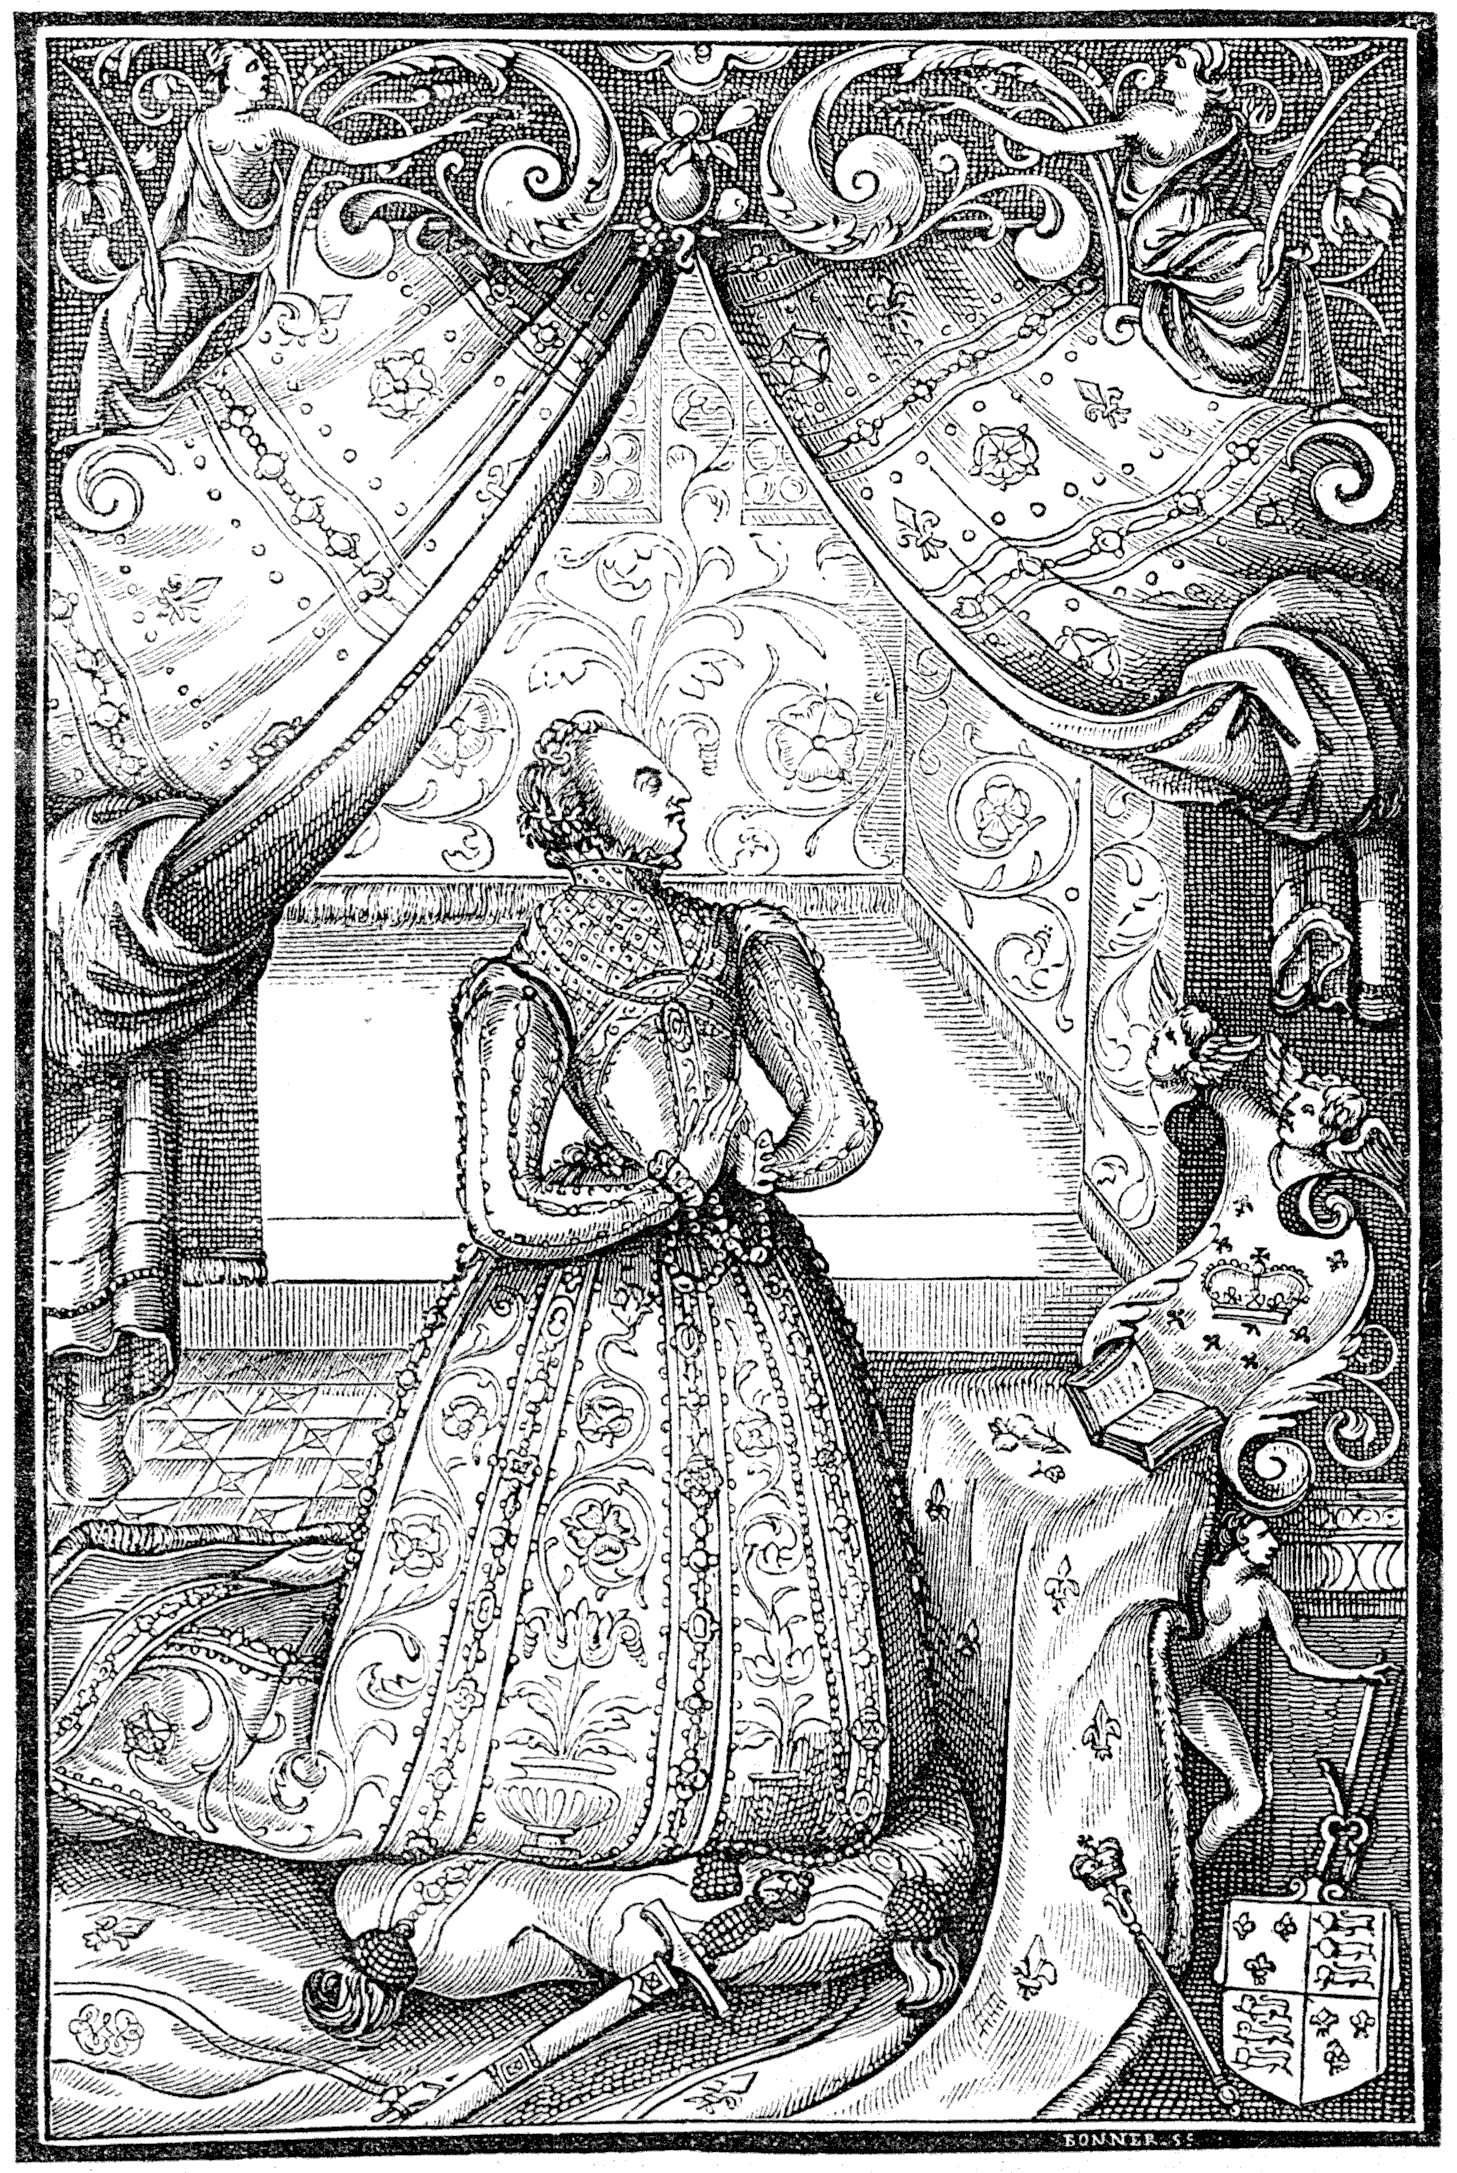 Portrait of Queen Elizabeth I from the 'Book of Christian Praiers,' known as Queen Elizabeth's Prayer-book, printed by John Day, 1578. From Henri Bouchot 'The Printed Book' (1887), page 145, published size in Bouchot 8.9 cm wide by 13.5 cm high.